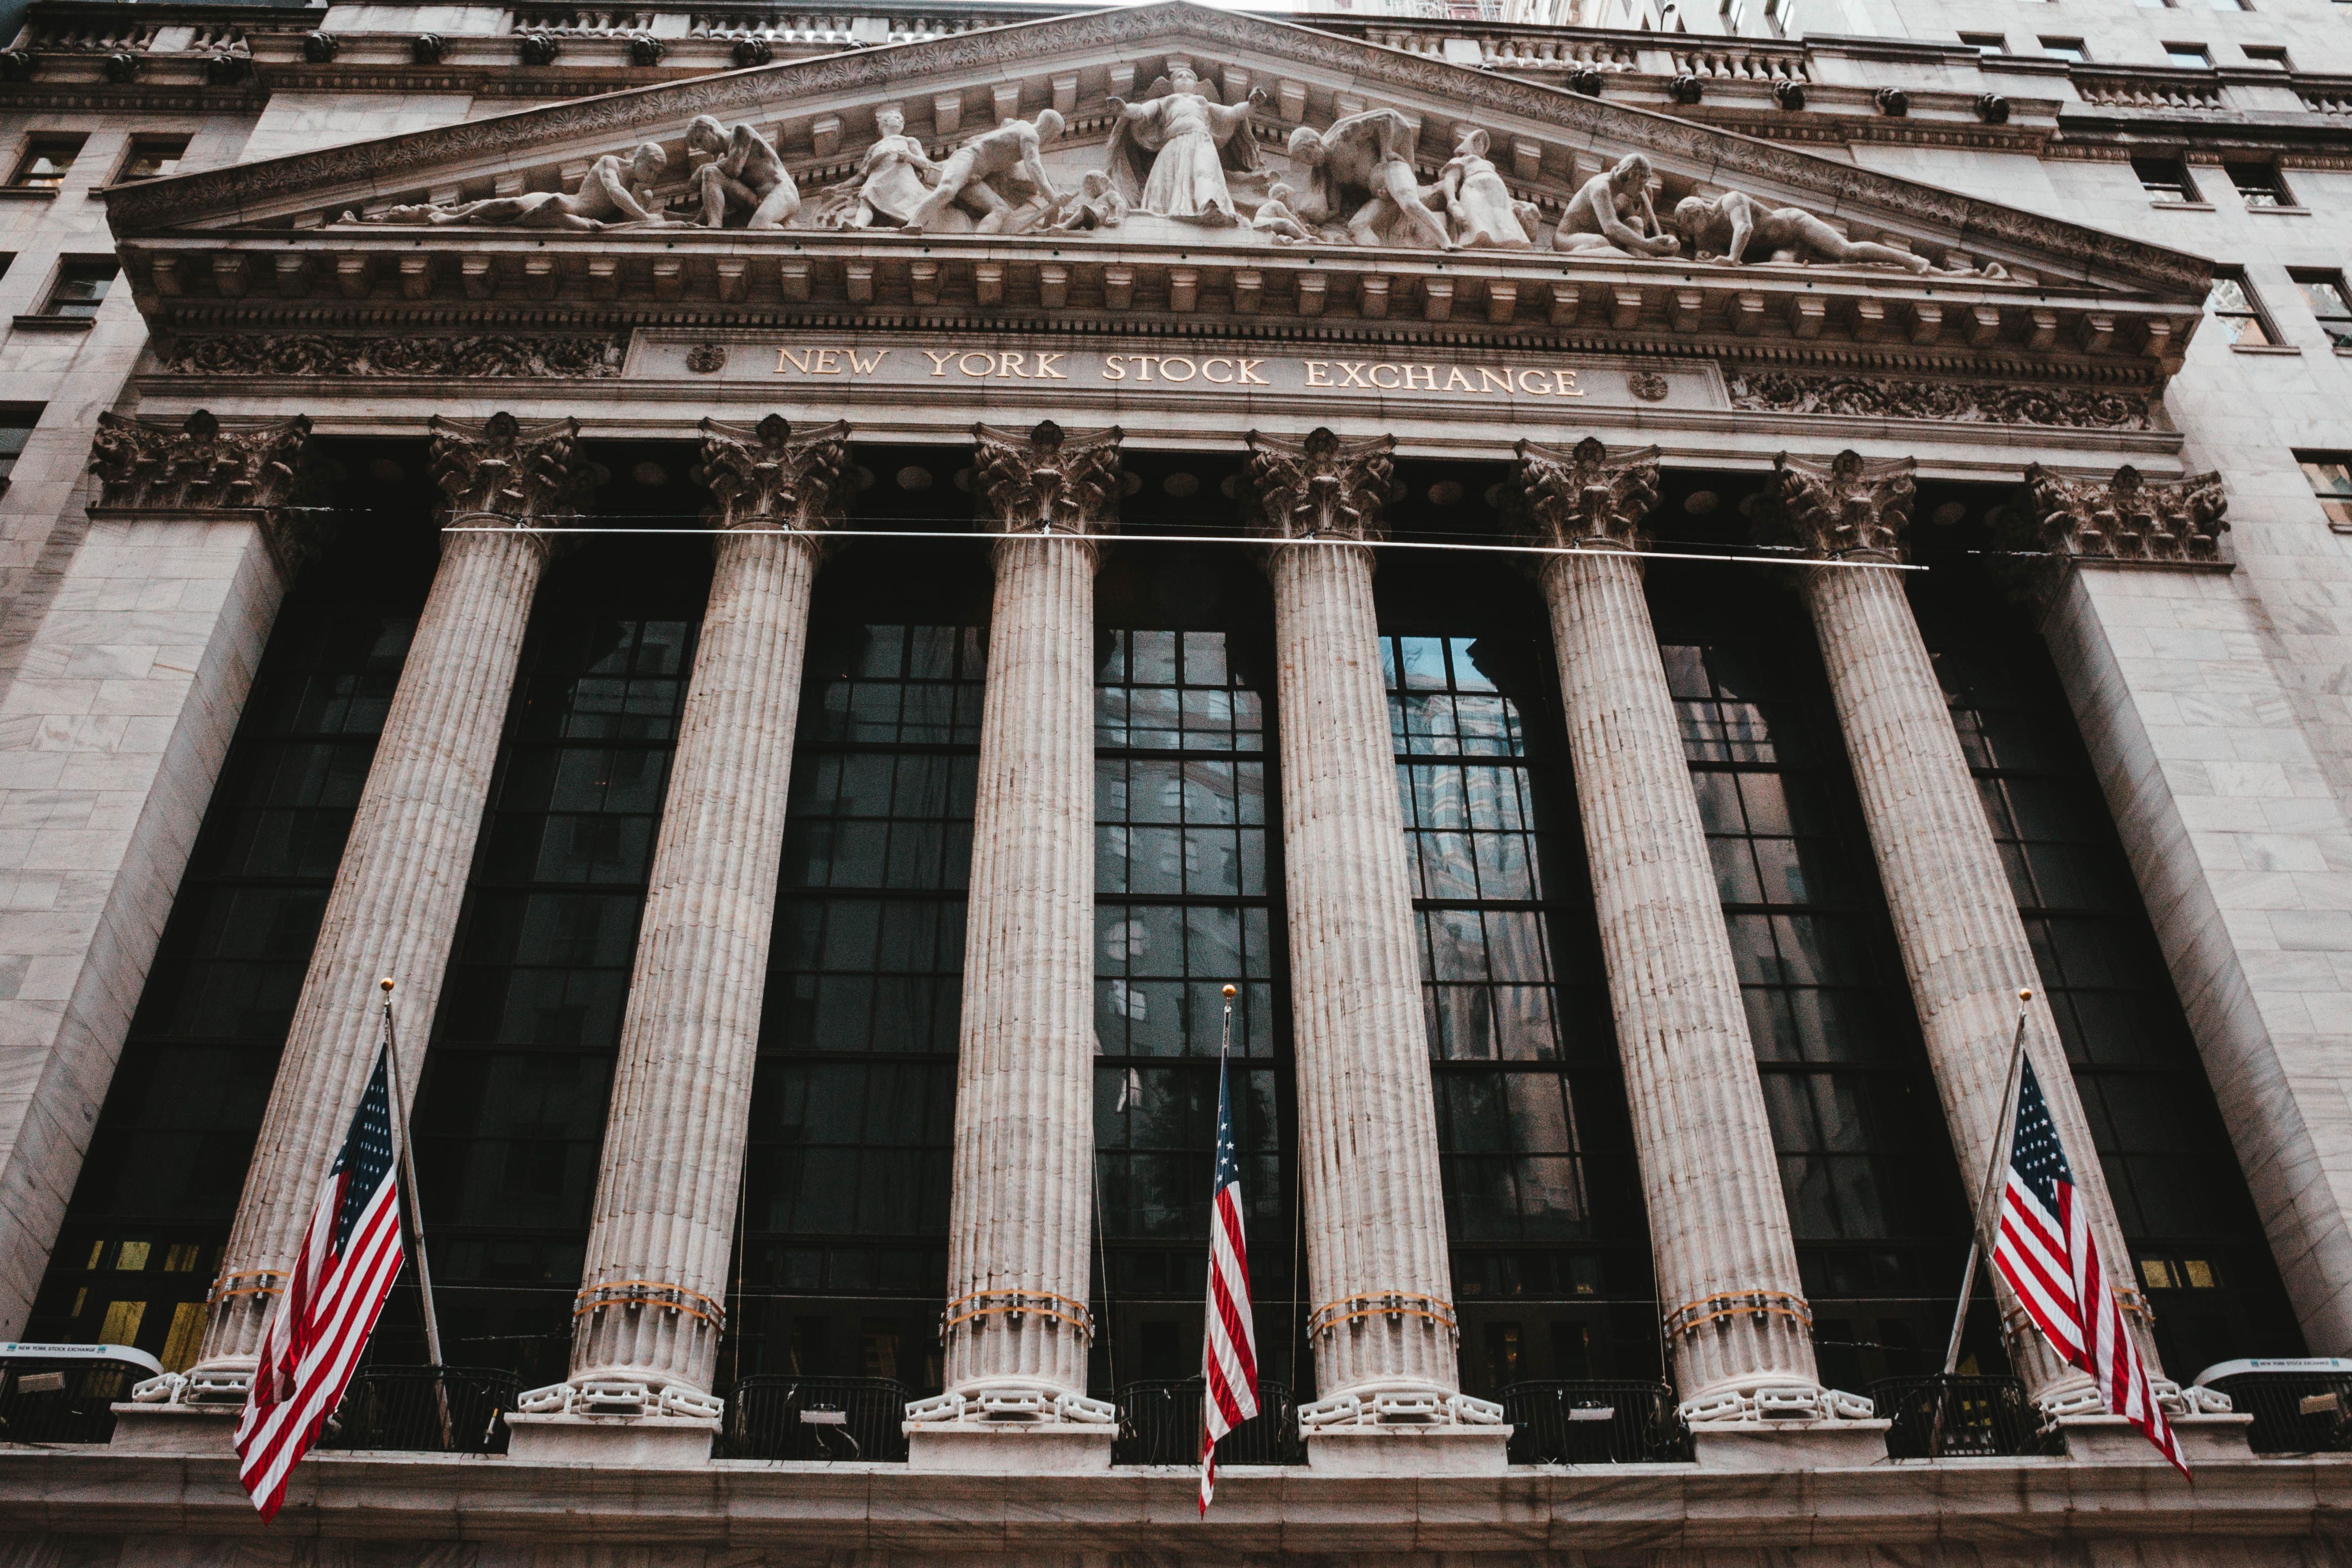 Nyse Picture. Download Free Image